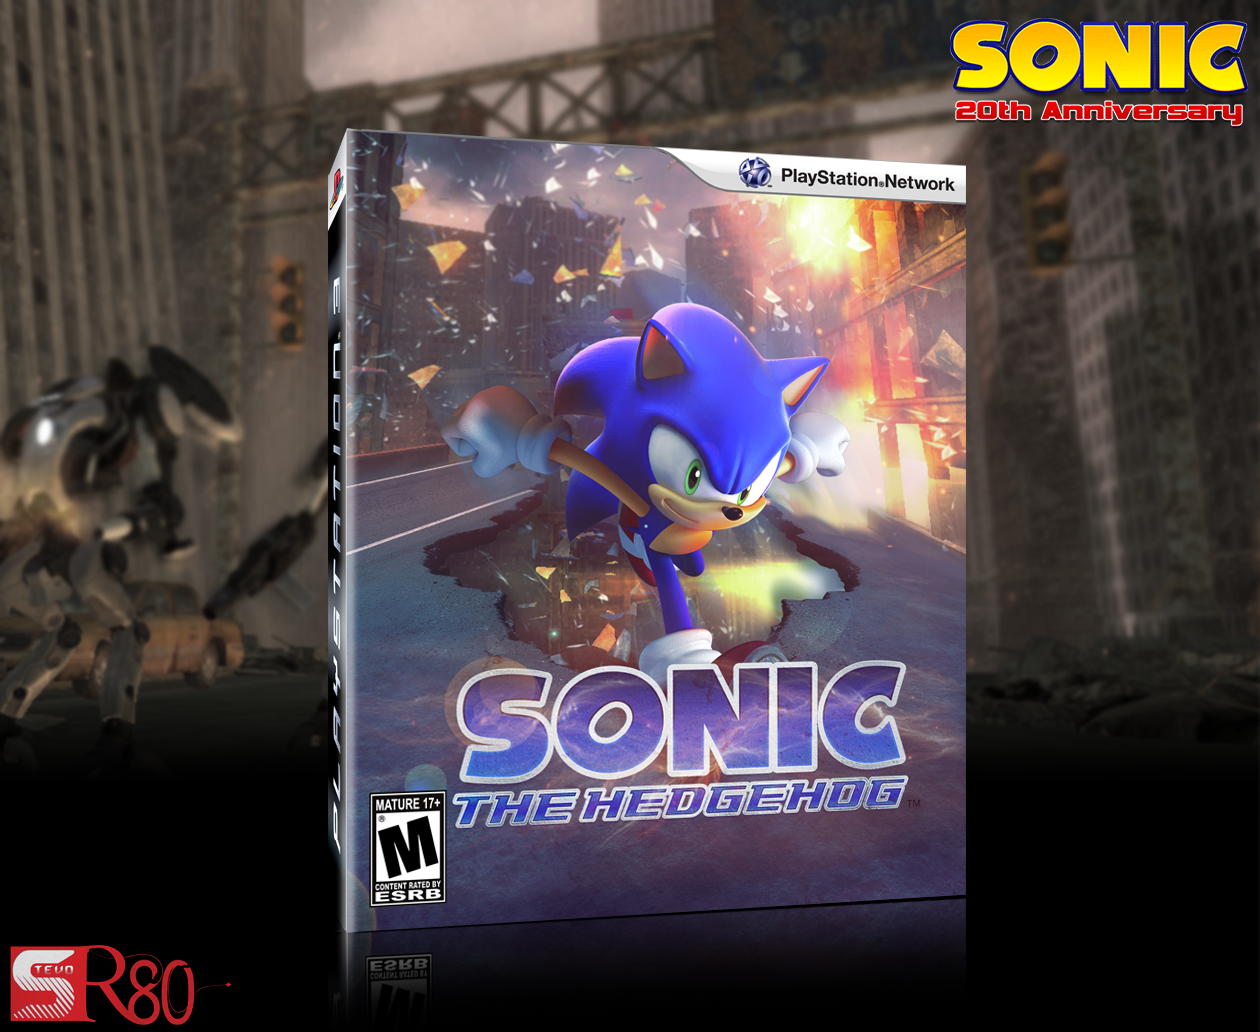 Sonic The Hedgehog 06 Playstation 3 Box Art Cover By Stevanr80